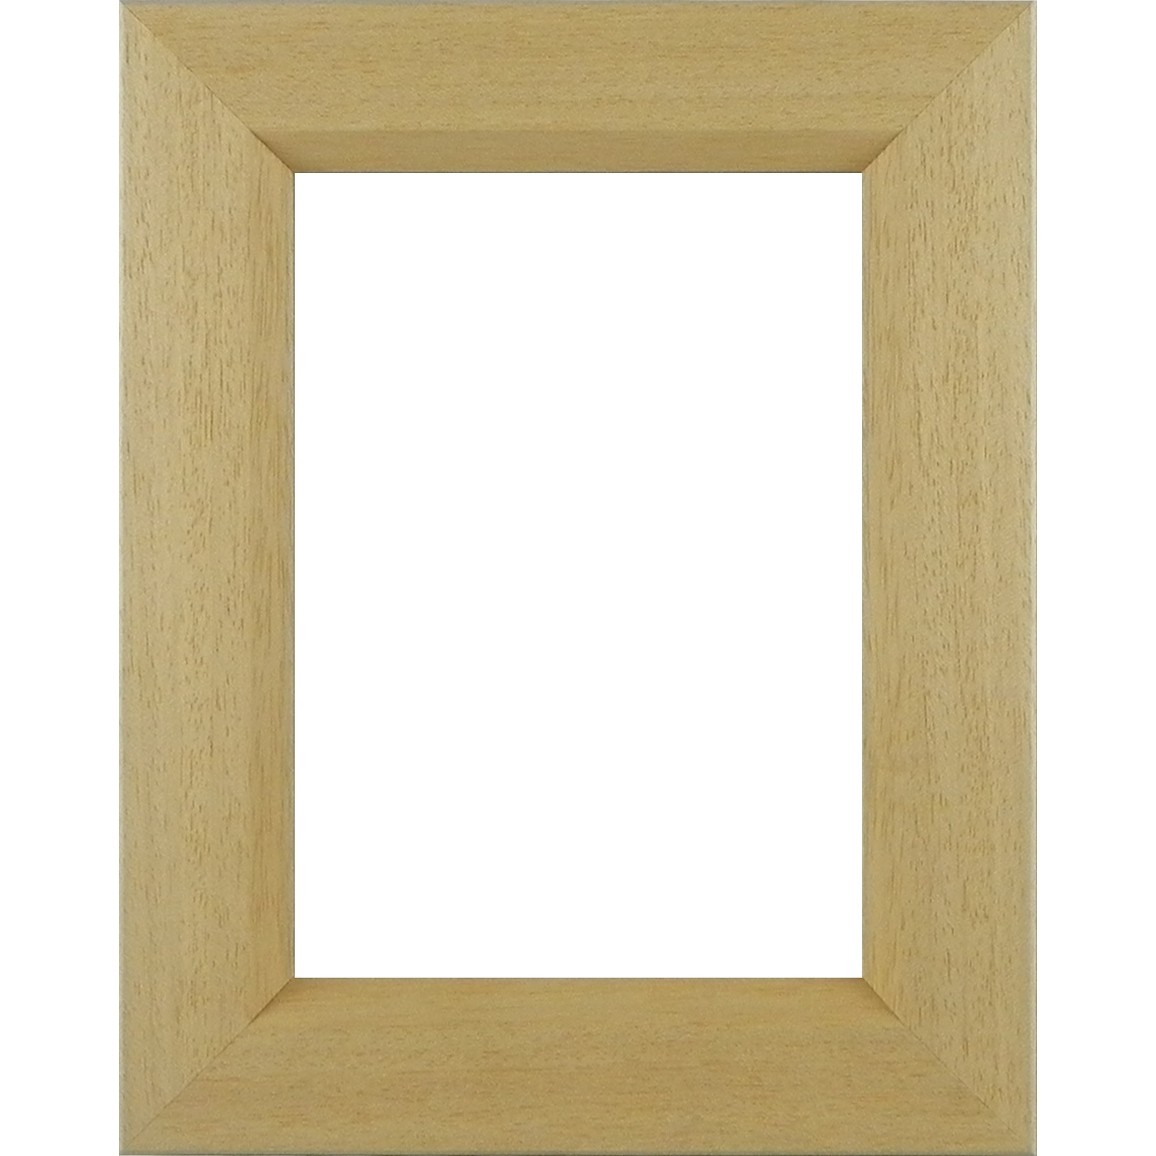 Picture Frame Medium Natural with chamfer